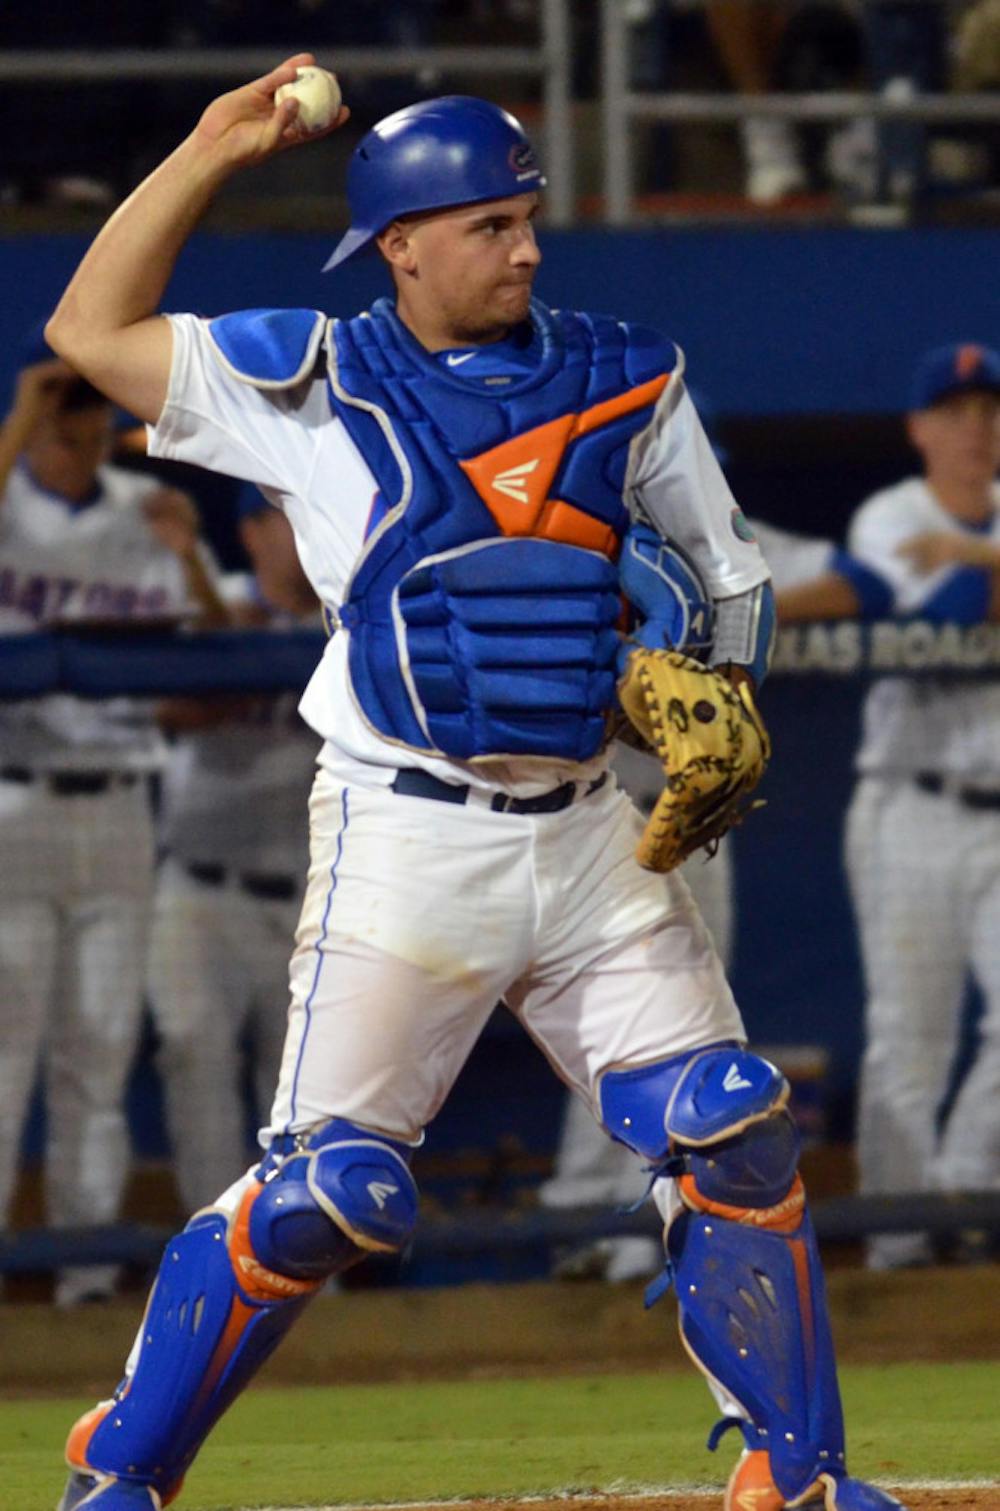 <p>UF's Mike Rivera throws a ball back to pitcher Bobby Poyner (not pictured) during Florida's 14-3 win against the South Carolina Gamecocks on April 11, 2015 at McKethan Stadium.</p>